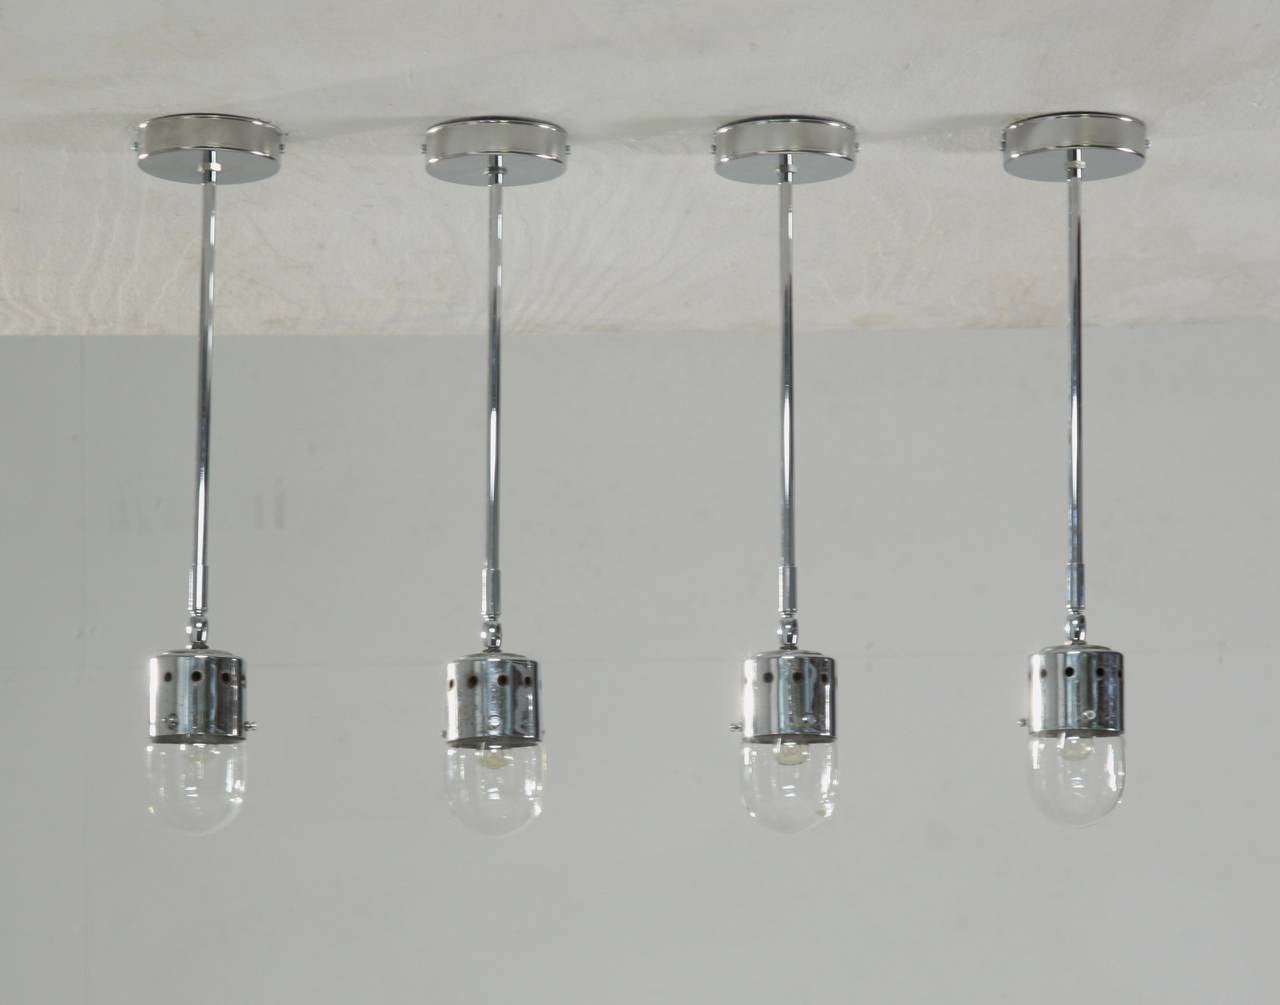 A set of four very minimalistic chrome ceiling lights from Italy. The lamps are made of a ceiling mounted stem with a perforated cylinder that holds the fitting and a bulb shaped transparant glass diffuser. The shades have a ball-joint connection,